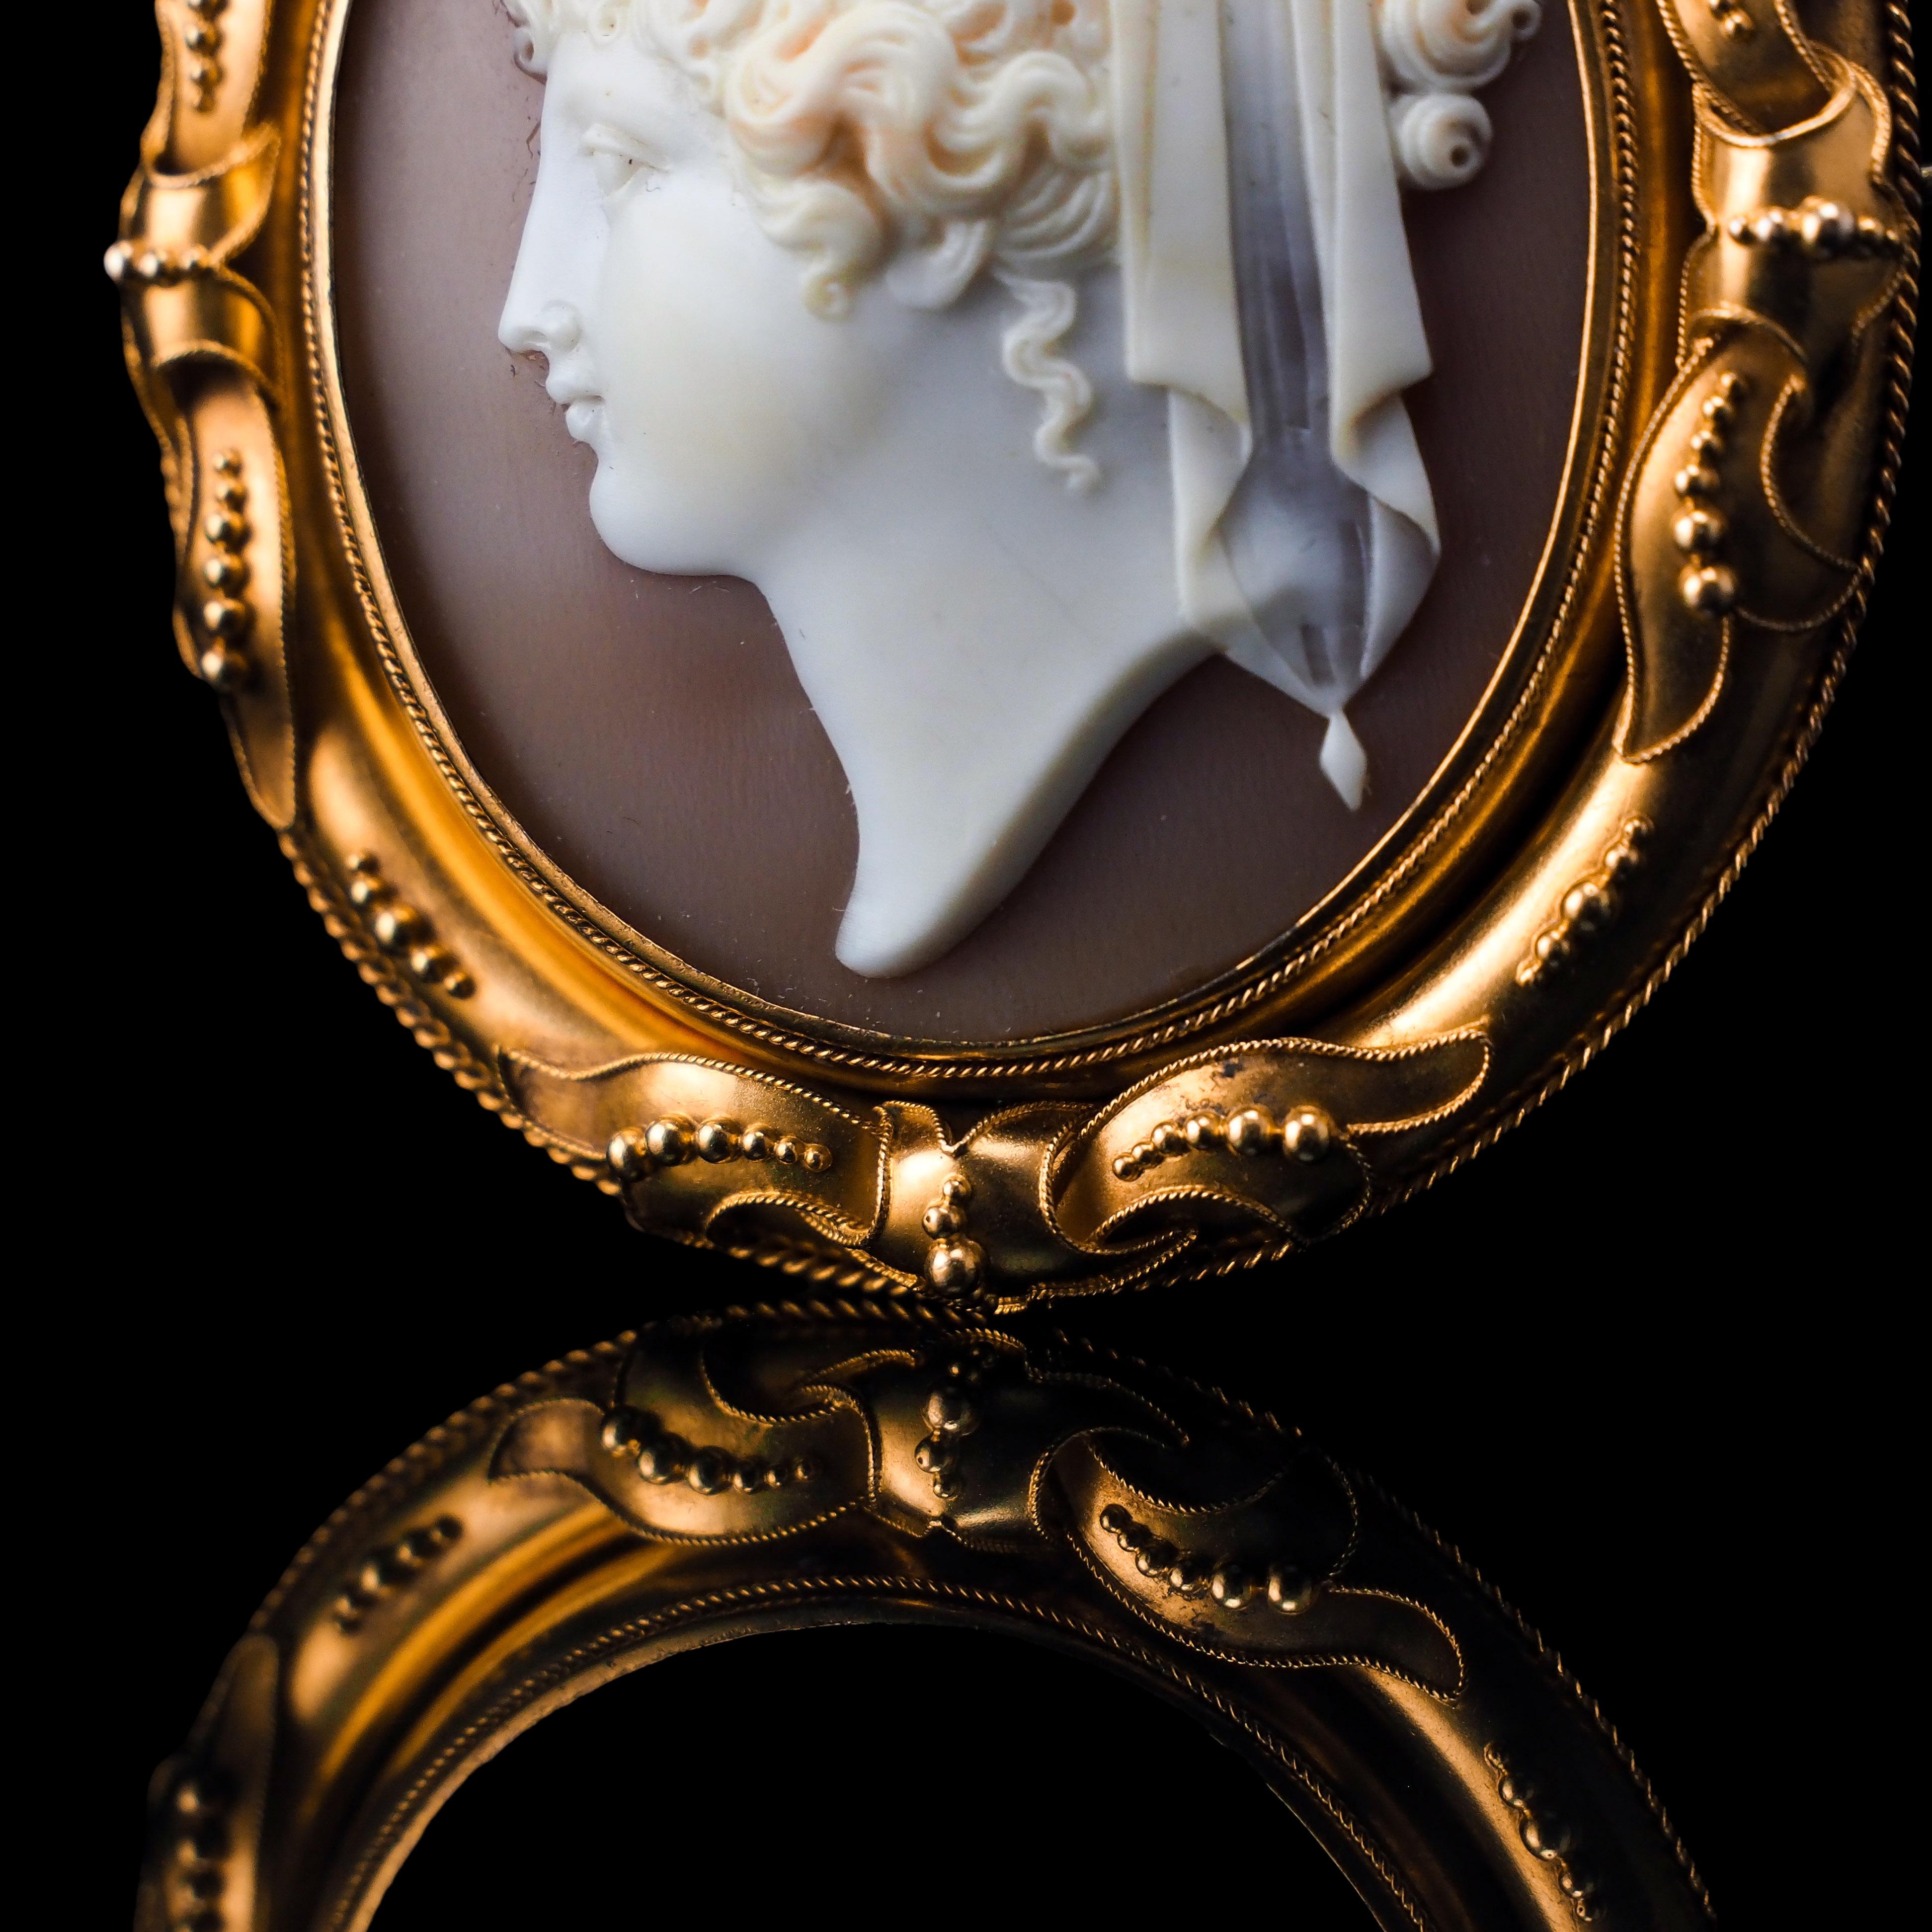 Antique Cameo Brooch Pendant Necklace 18K Gold - Victorian c.1860 For Sale 12